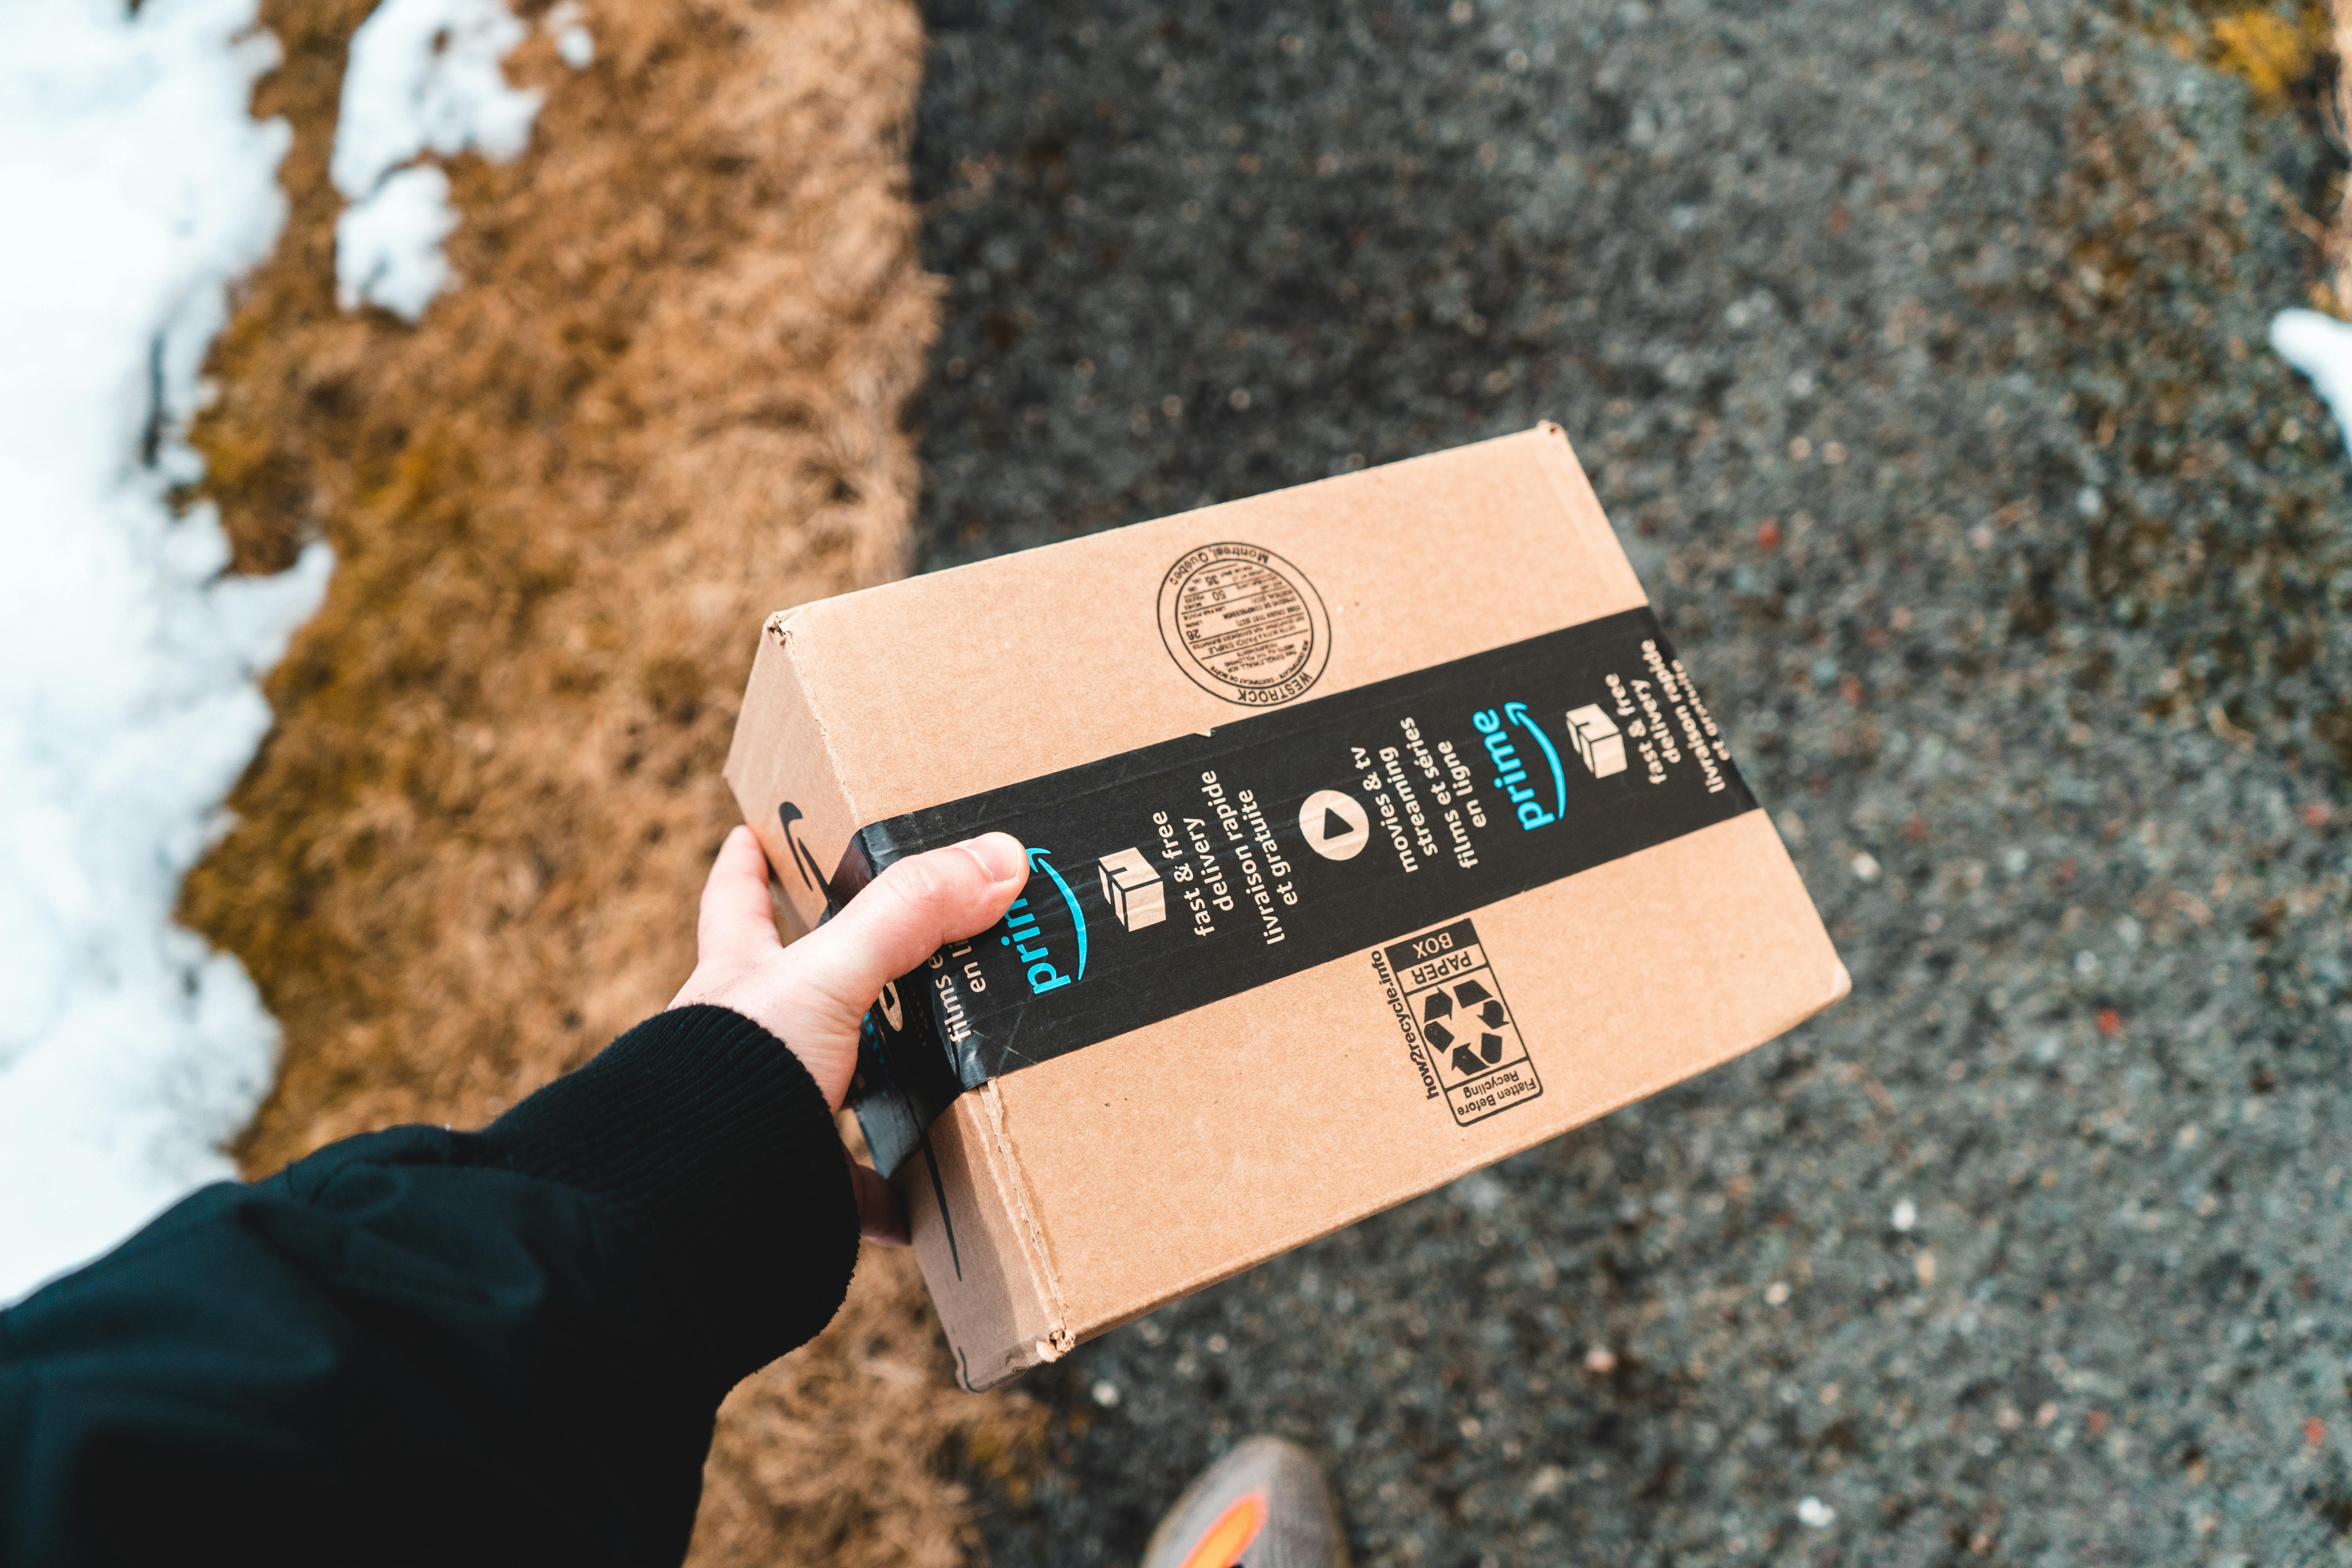 A  person holding a package | Source: Pexels